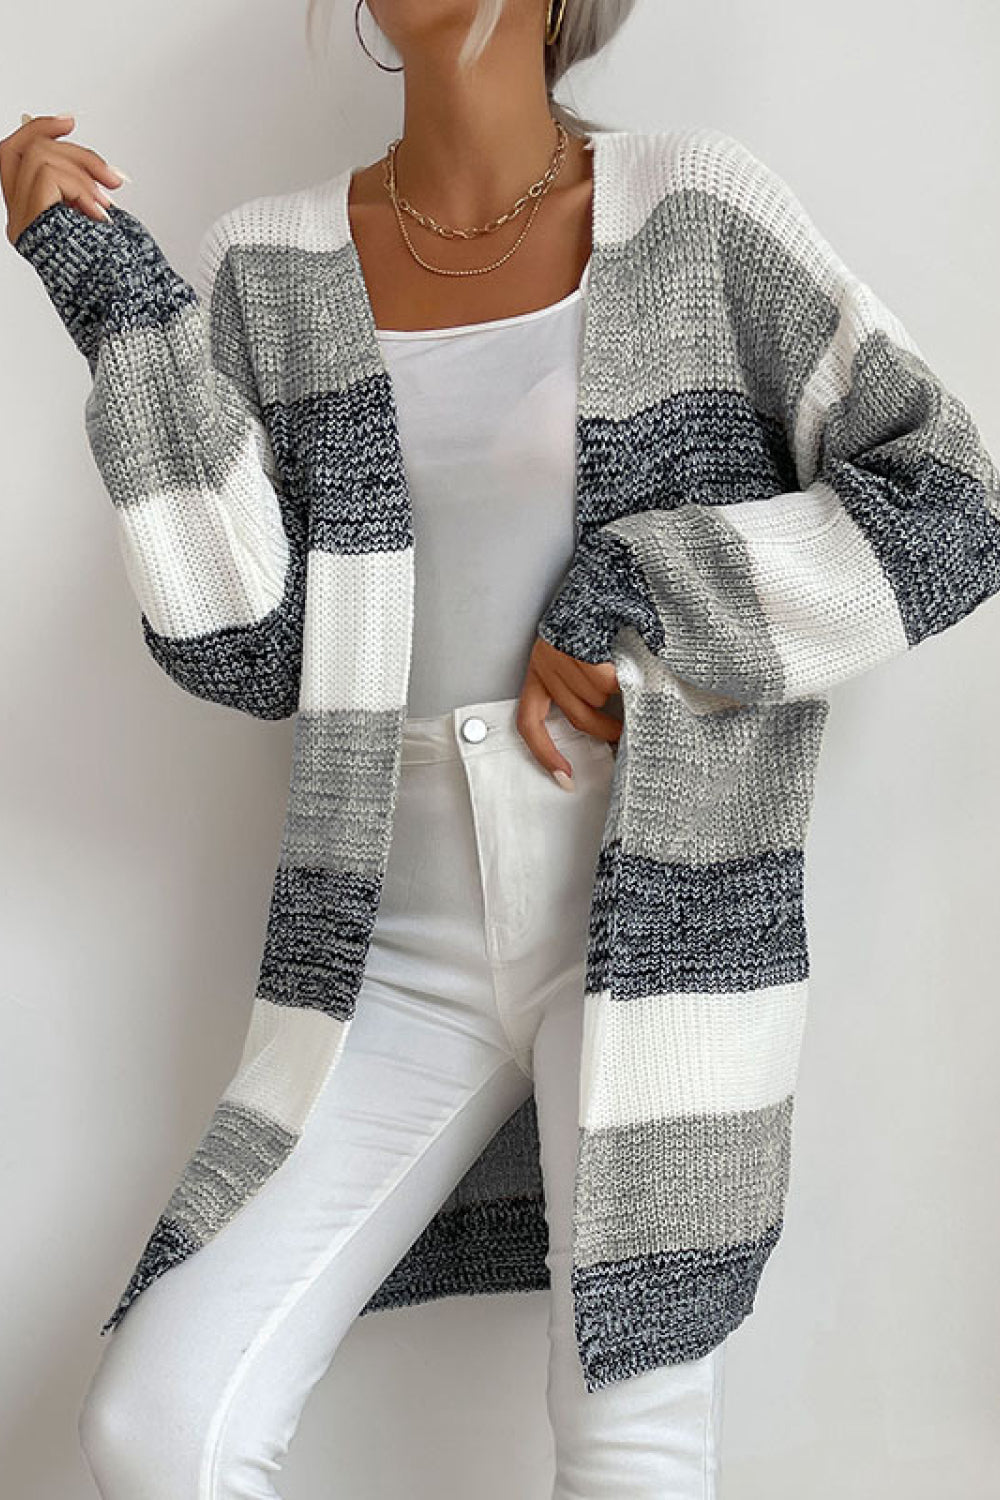 Striped Long Sleeve Duster Cardigan - Women’s Clothing & Accessories - Shirts & Tops - 9 - 2024